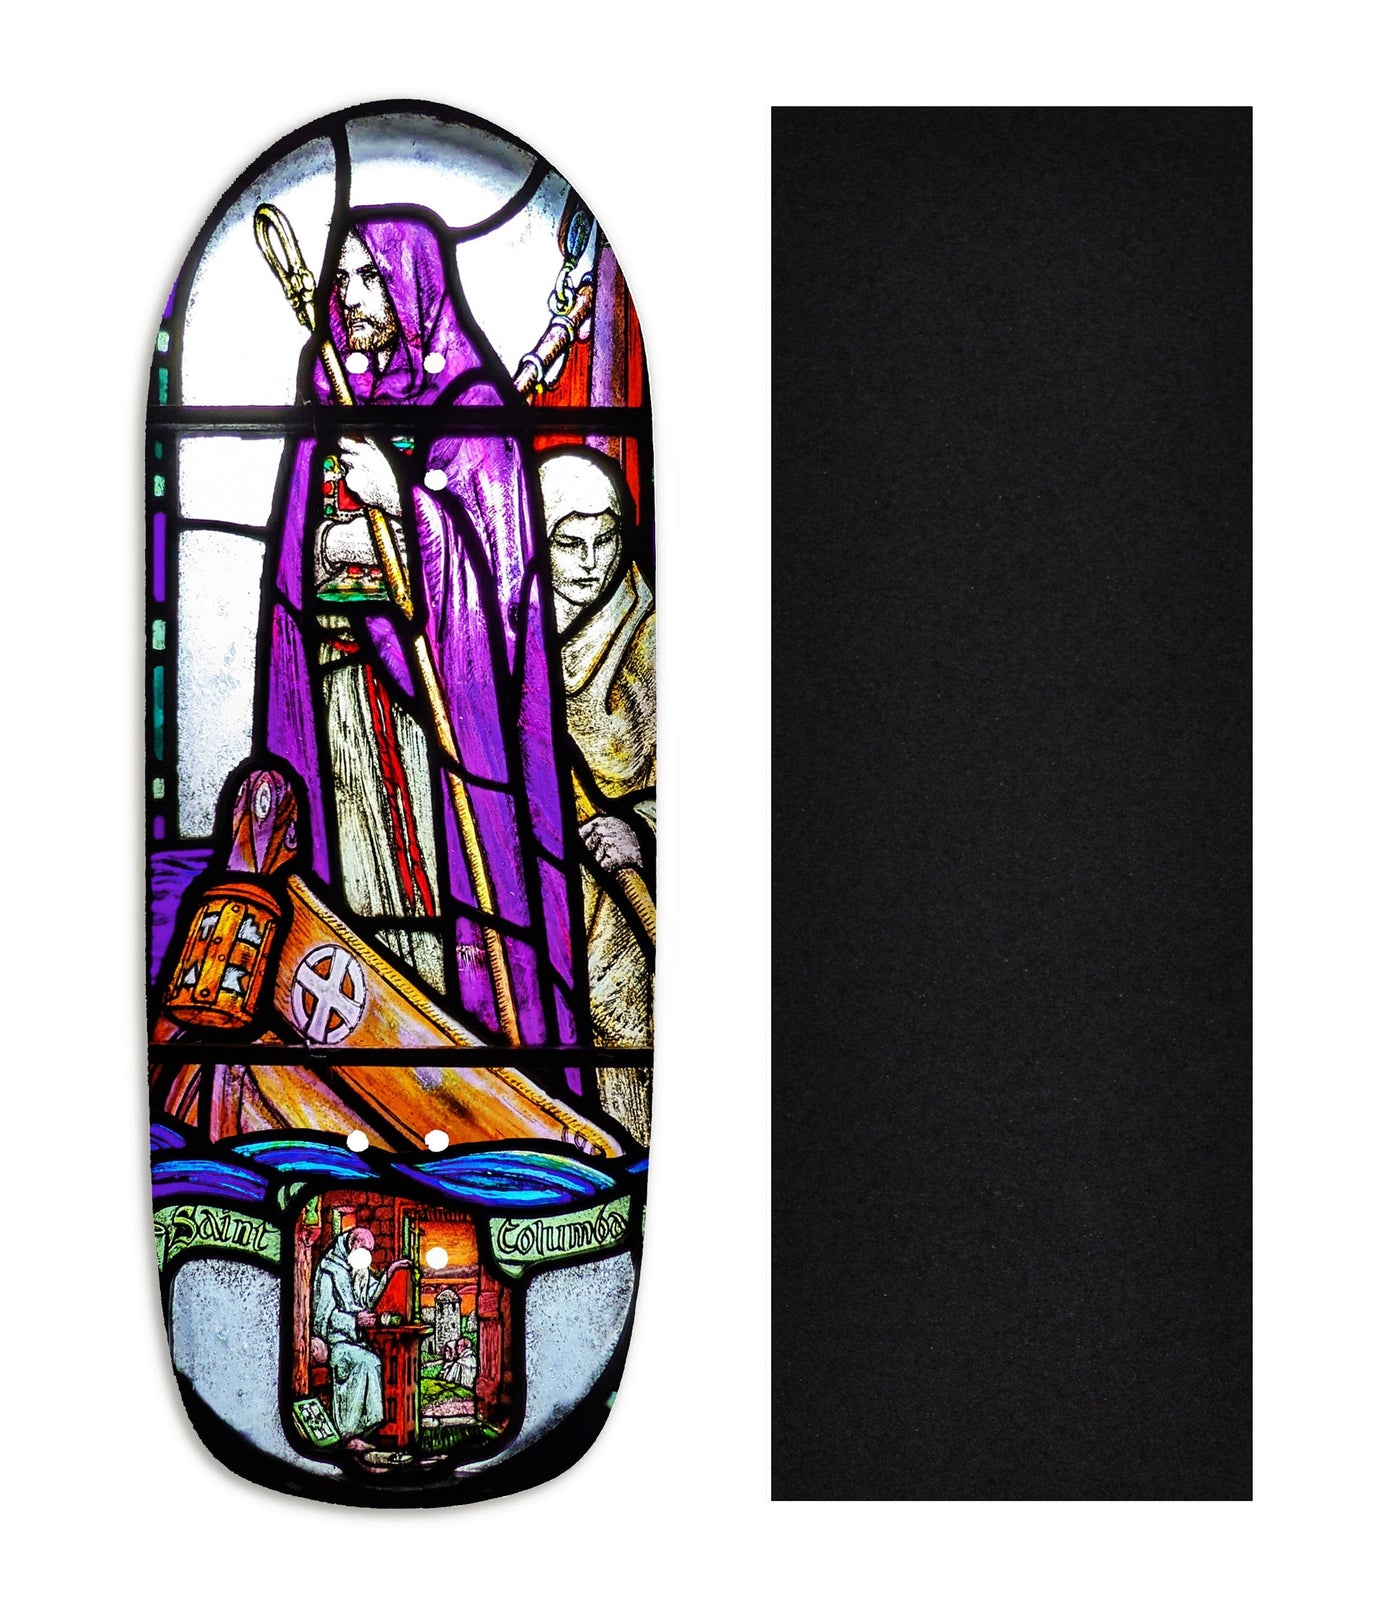 Teak Tuning Heat Transfer Graphic Wooden Fingerboard Deck, "St. Columba Stained Glass" Poolparty Deck